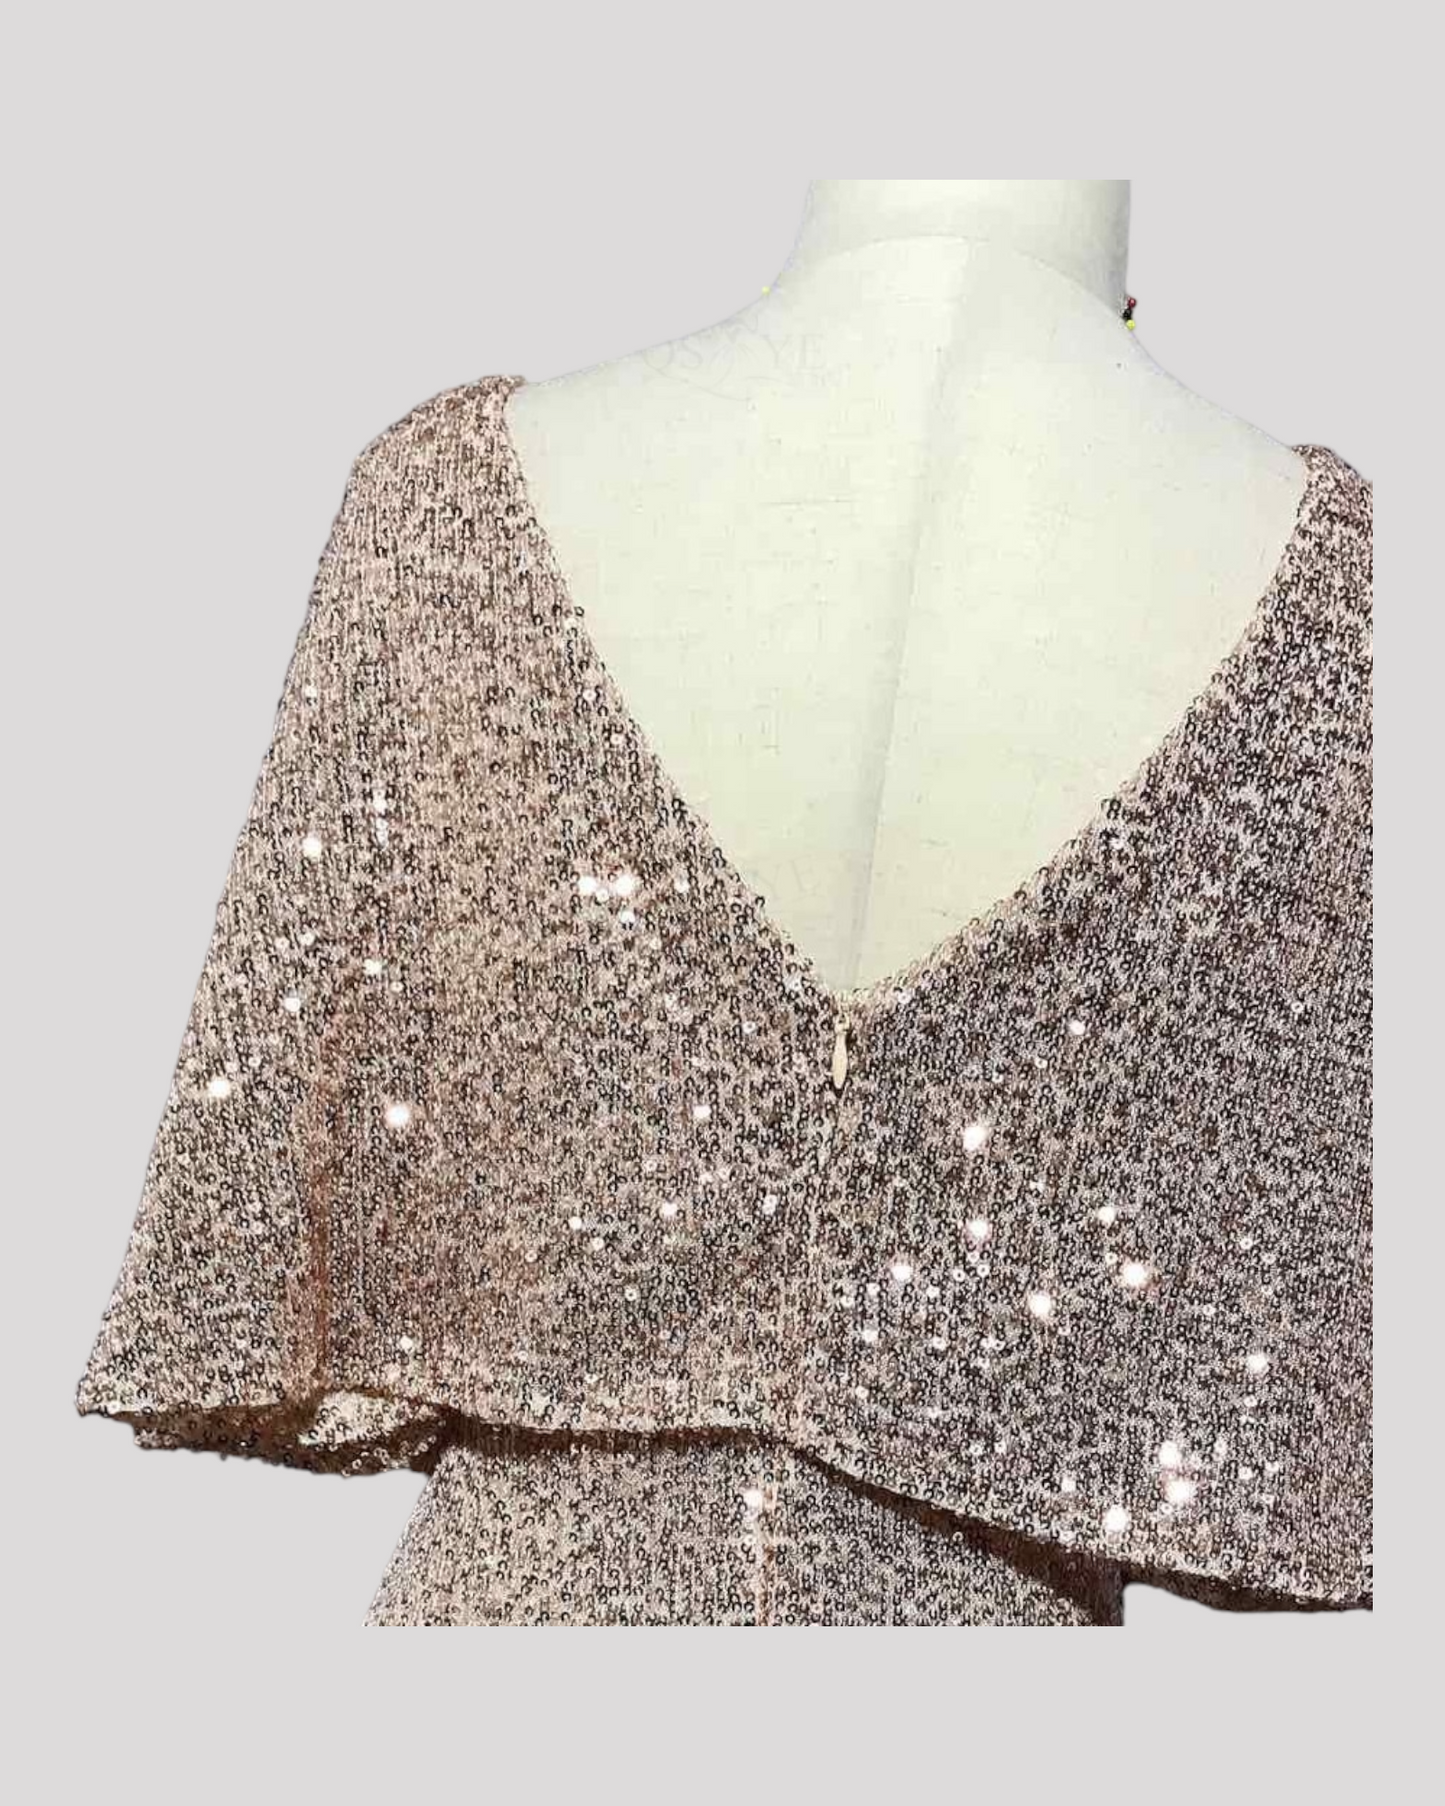 Cape Style Sequin Mermaid Evening Dress available in 6 colours